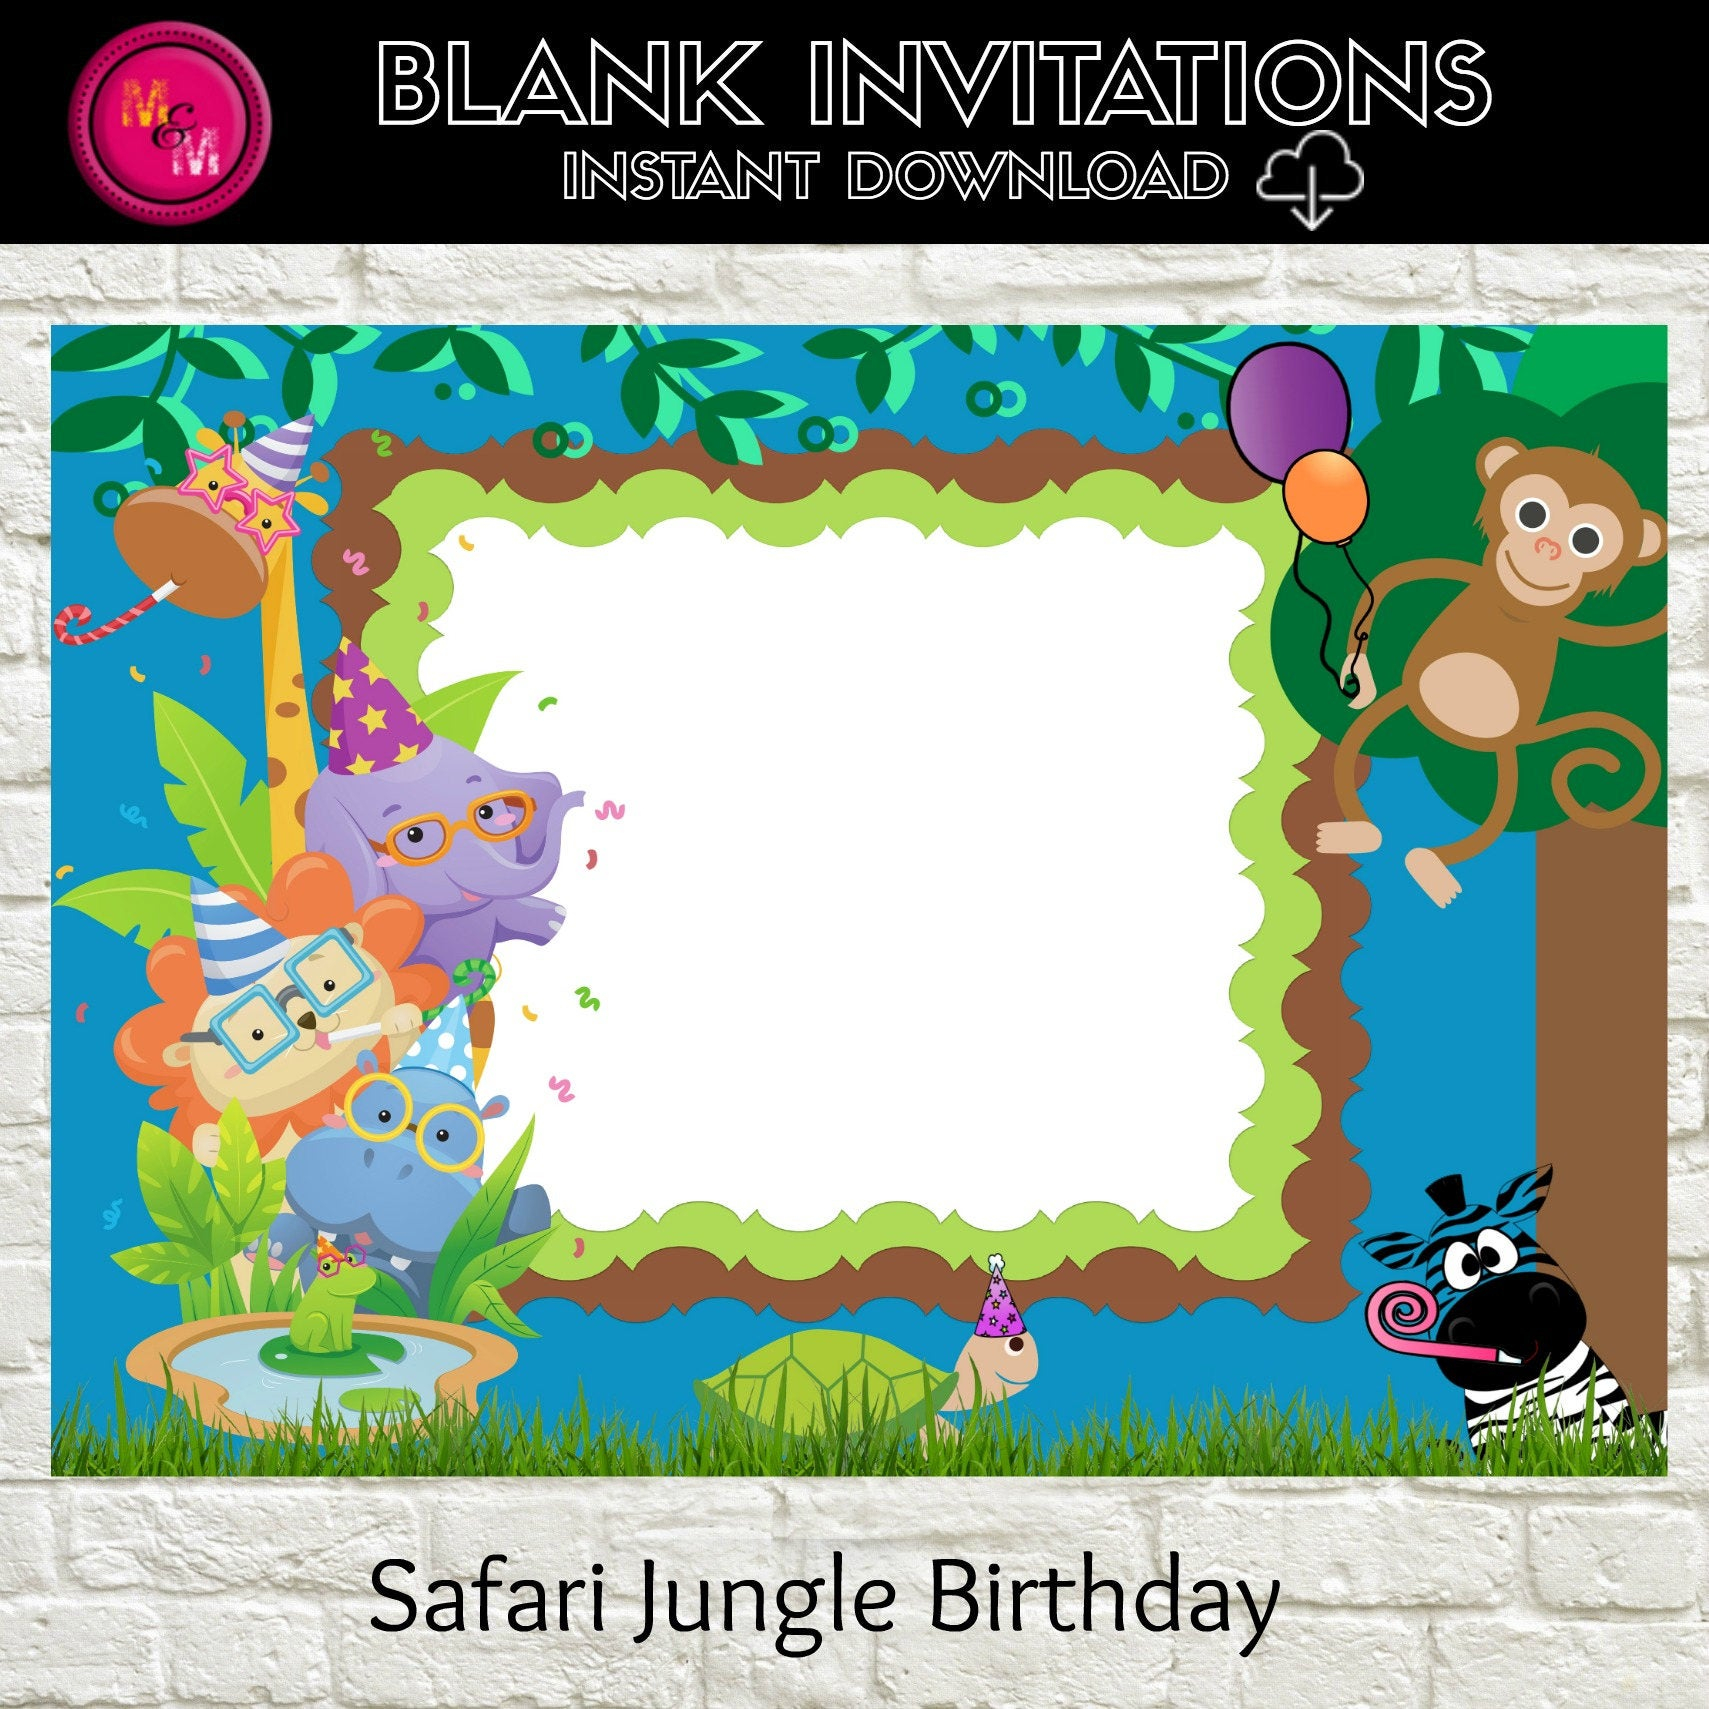 Safari Jungle Birthday Invitation Blank Instant Download Etsy within proportions 1709 X 1709